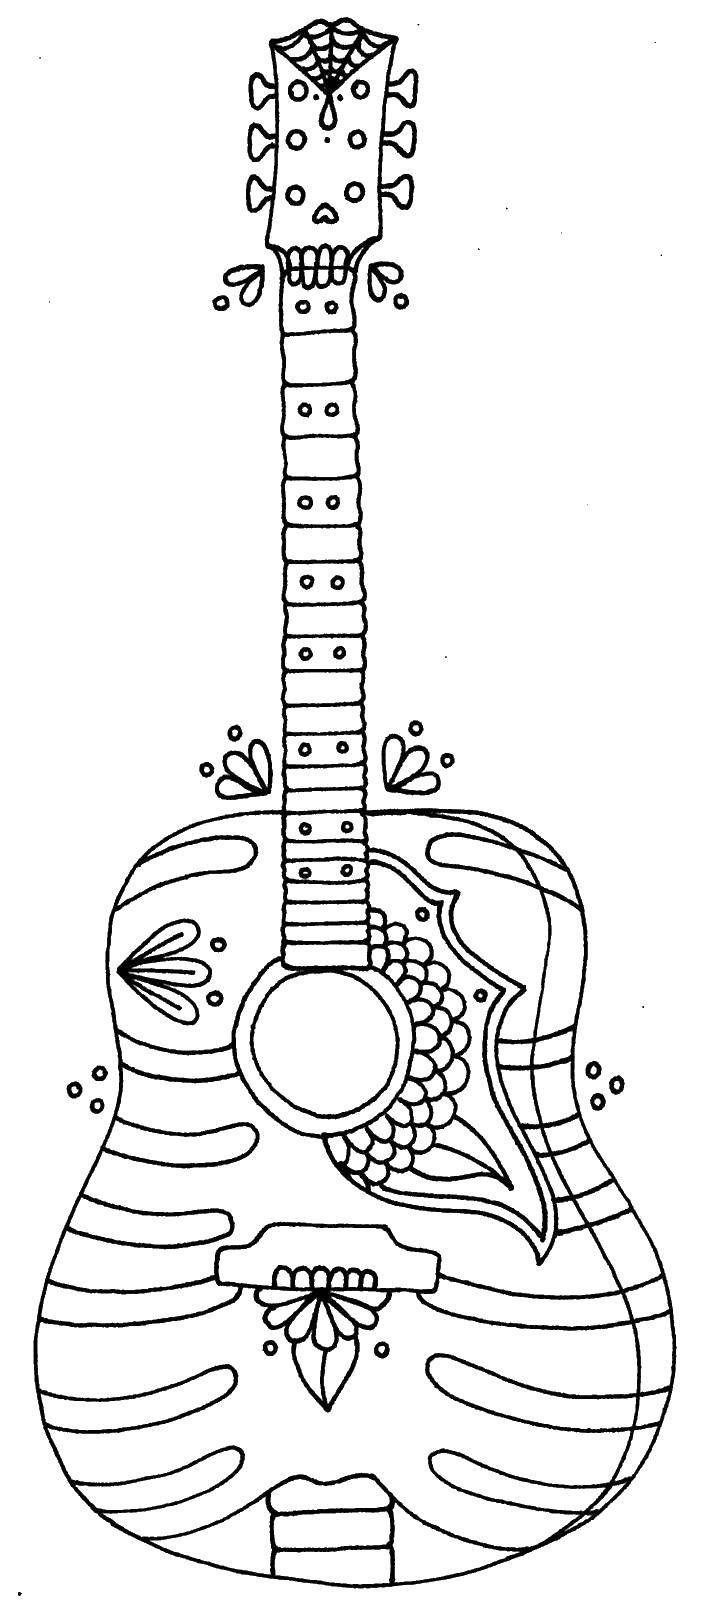 Coloring Colorized guitar. Category Electric guitar. Tags:  guitar, strings.